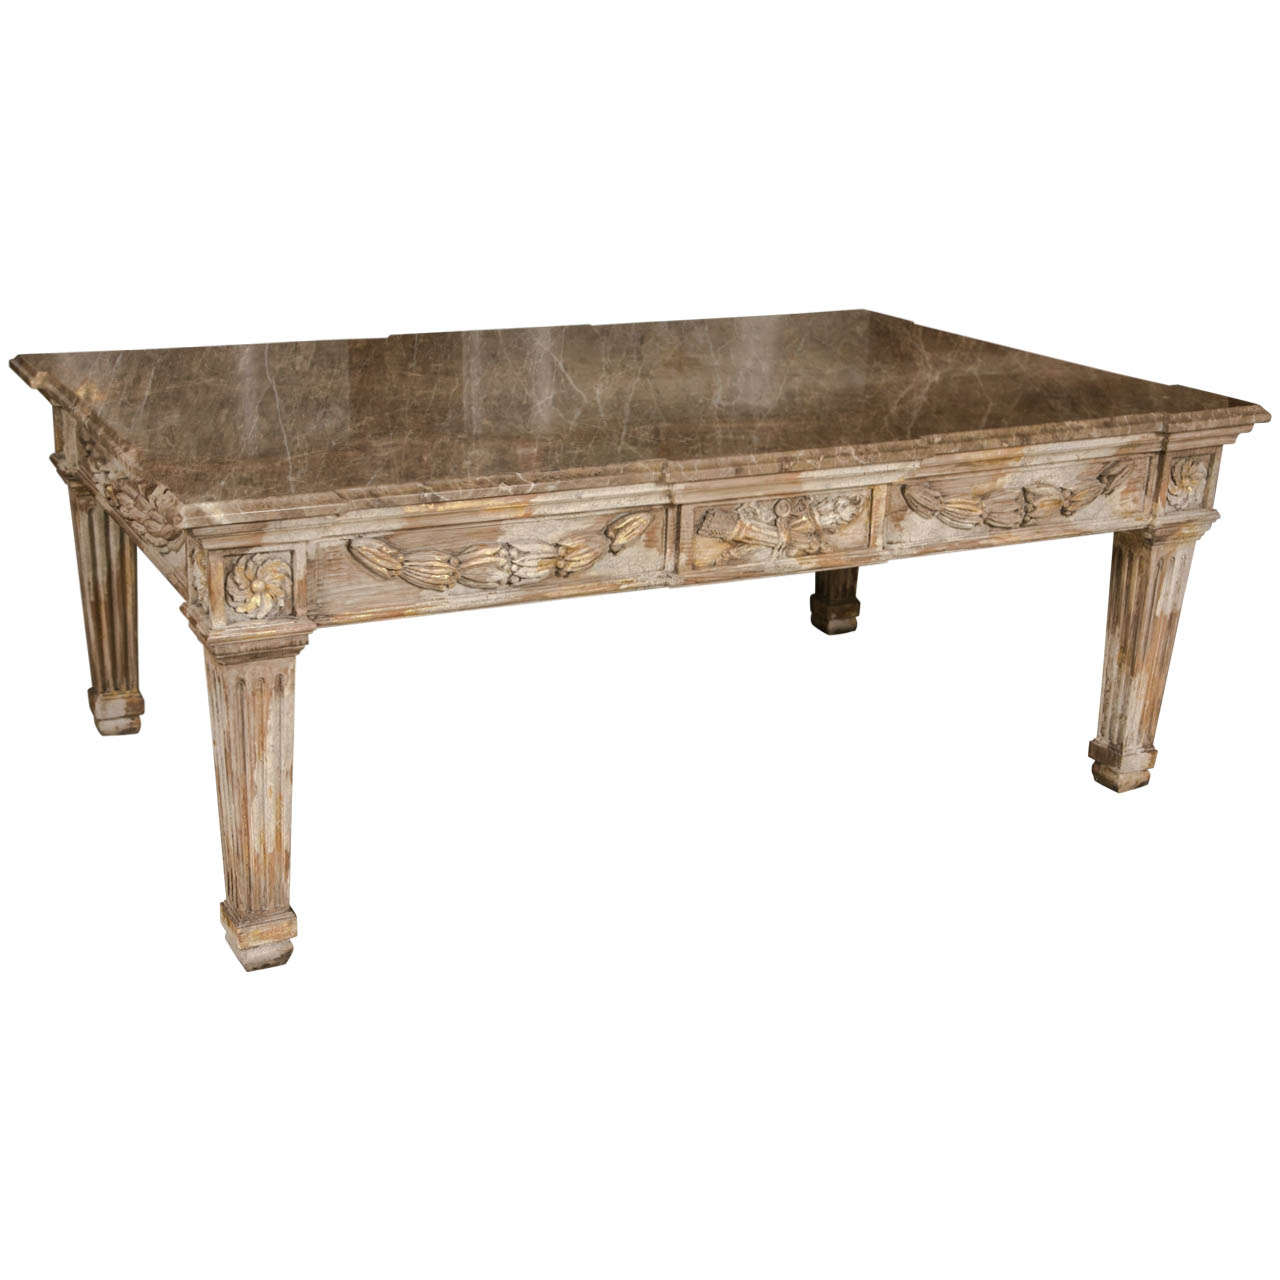 Carved Wood Neoclassical Style Coffee Table